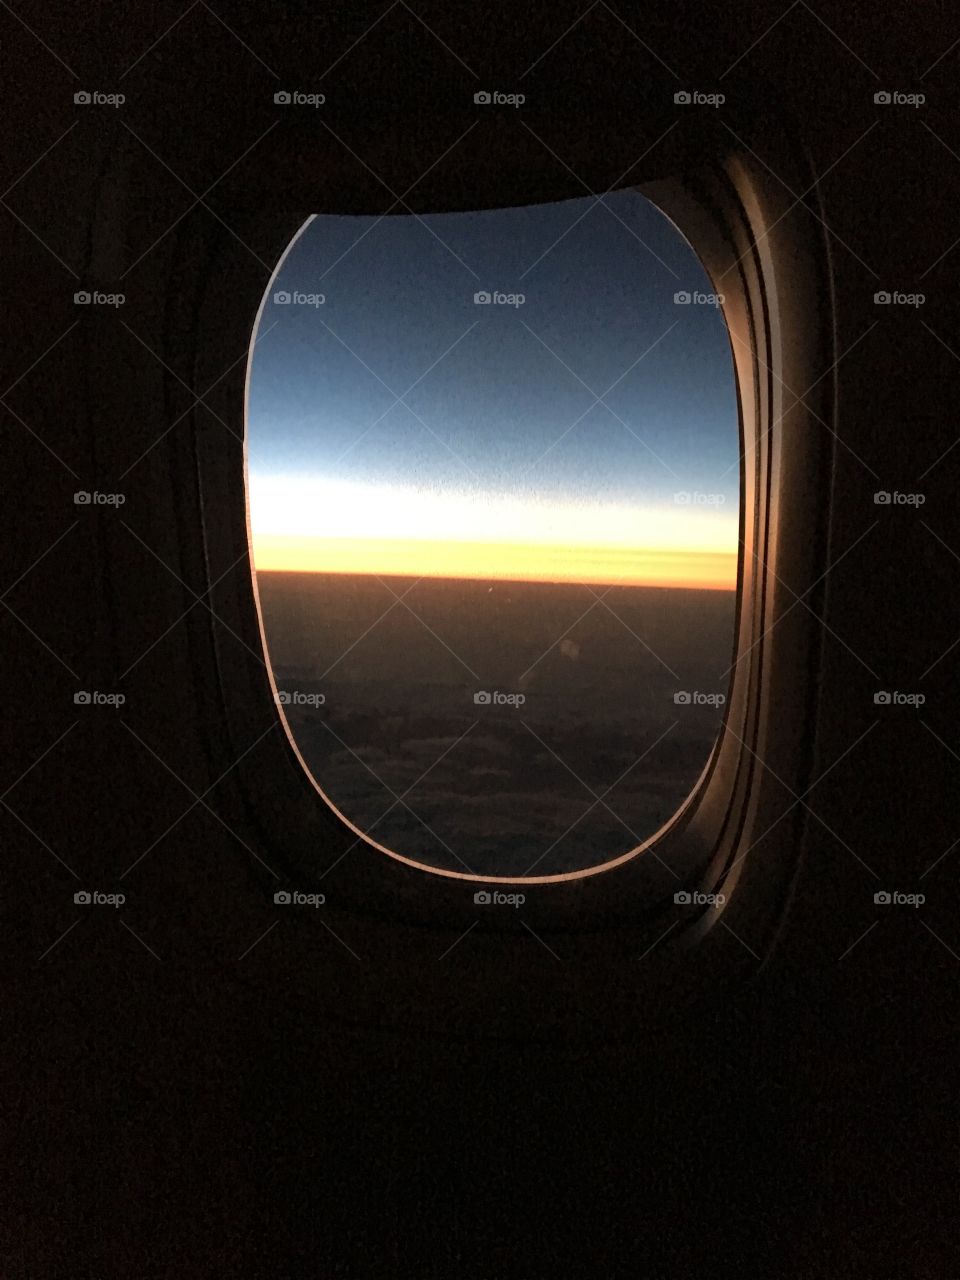 Sunrise from 37,000 feat over the pacific.  Taken from a business class seat on Air New Zealand flight from Houston to Auckland 